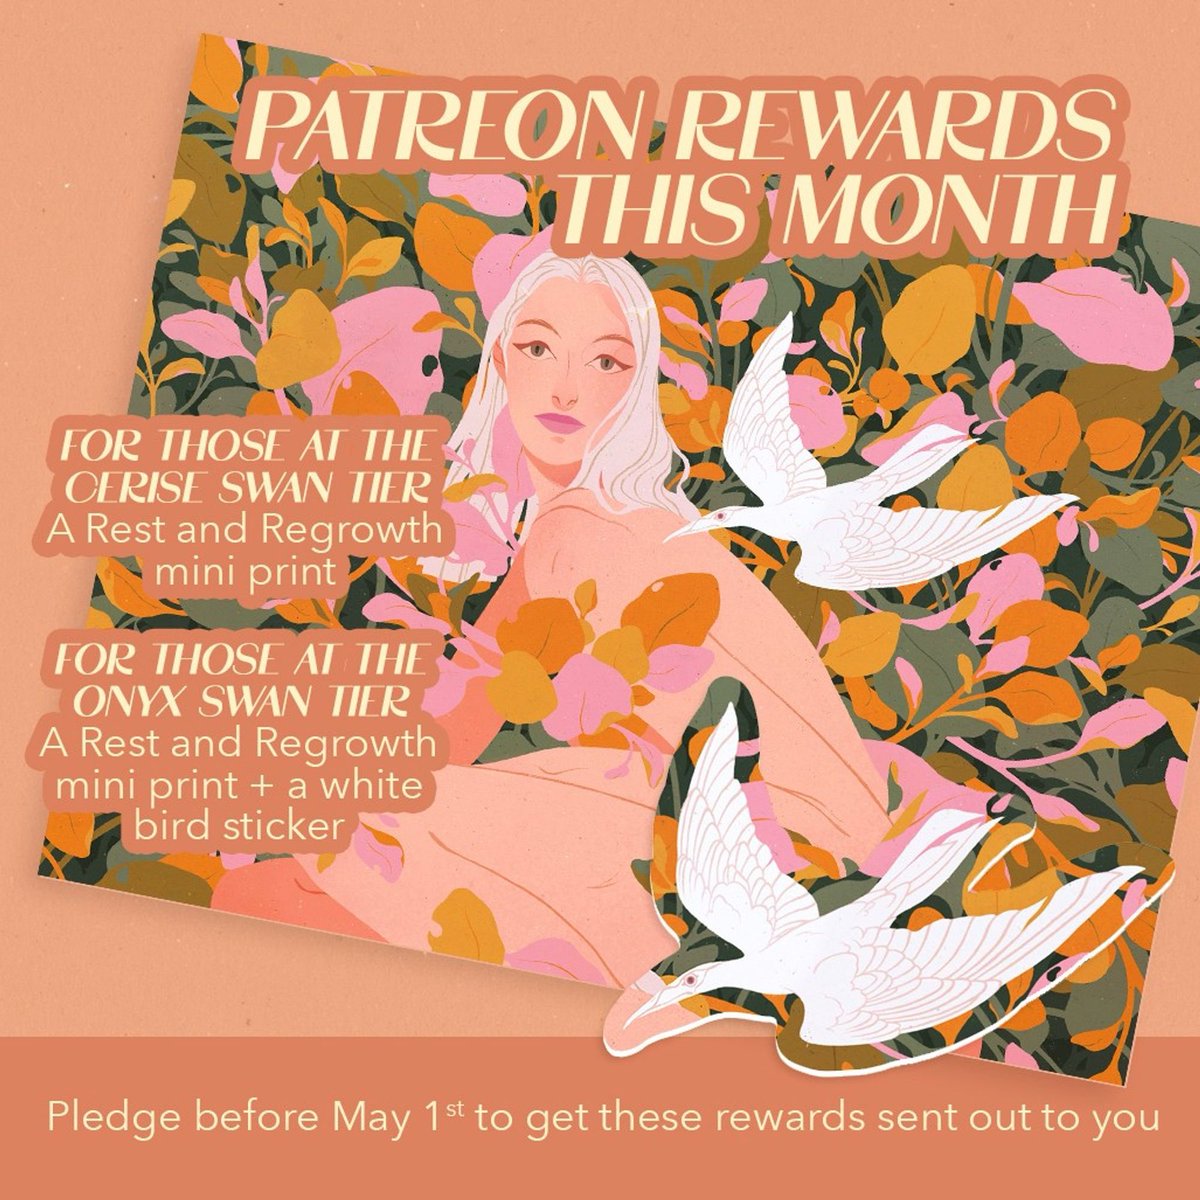 Last few days to get this month's physical rewards at my Patreon!🧡 There has been a lot of talk about supporting artists during these weird times lately and Patreon is the most direct way to help creatives. If you like my work + want to learn more patreon.com/samanthamash